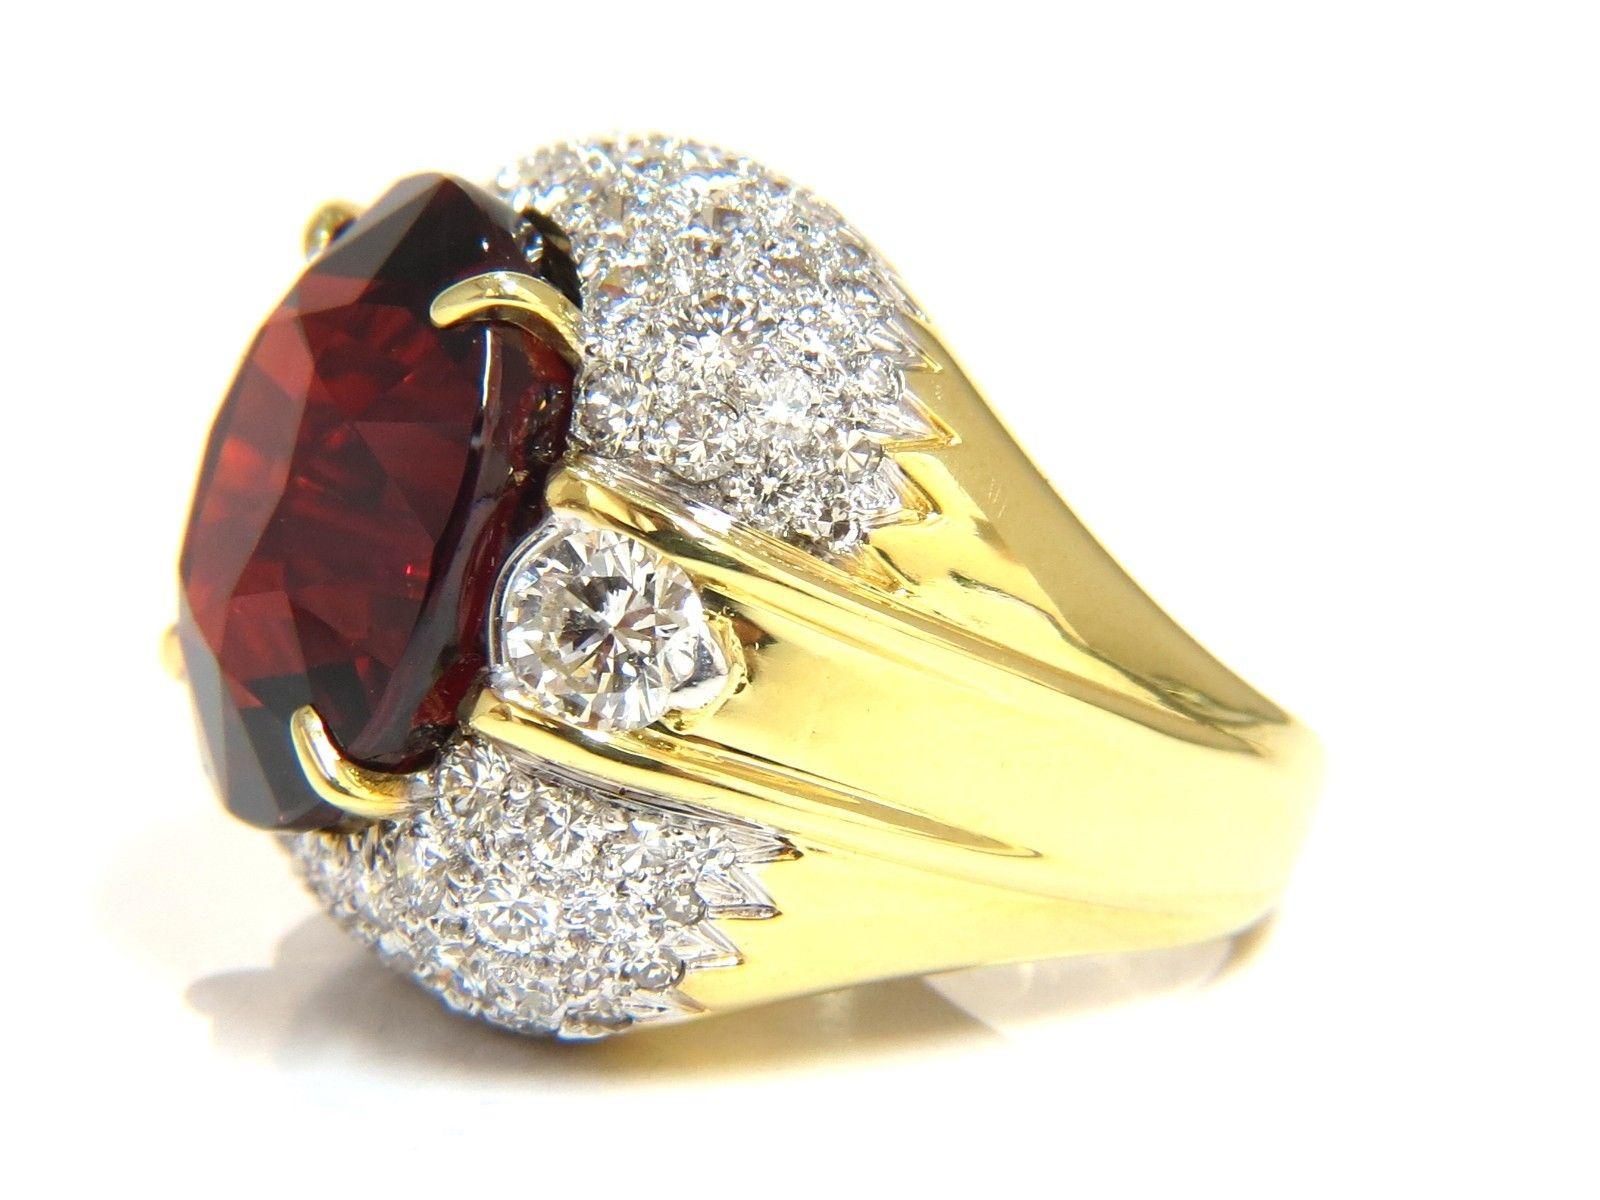 32.64ct GIA Natural Red Spessartite Garnet Diamonds Raised Dome Ring 18KT In New Condition For Sale In New York, NY